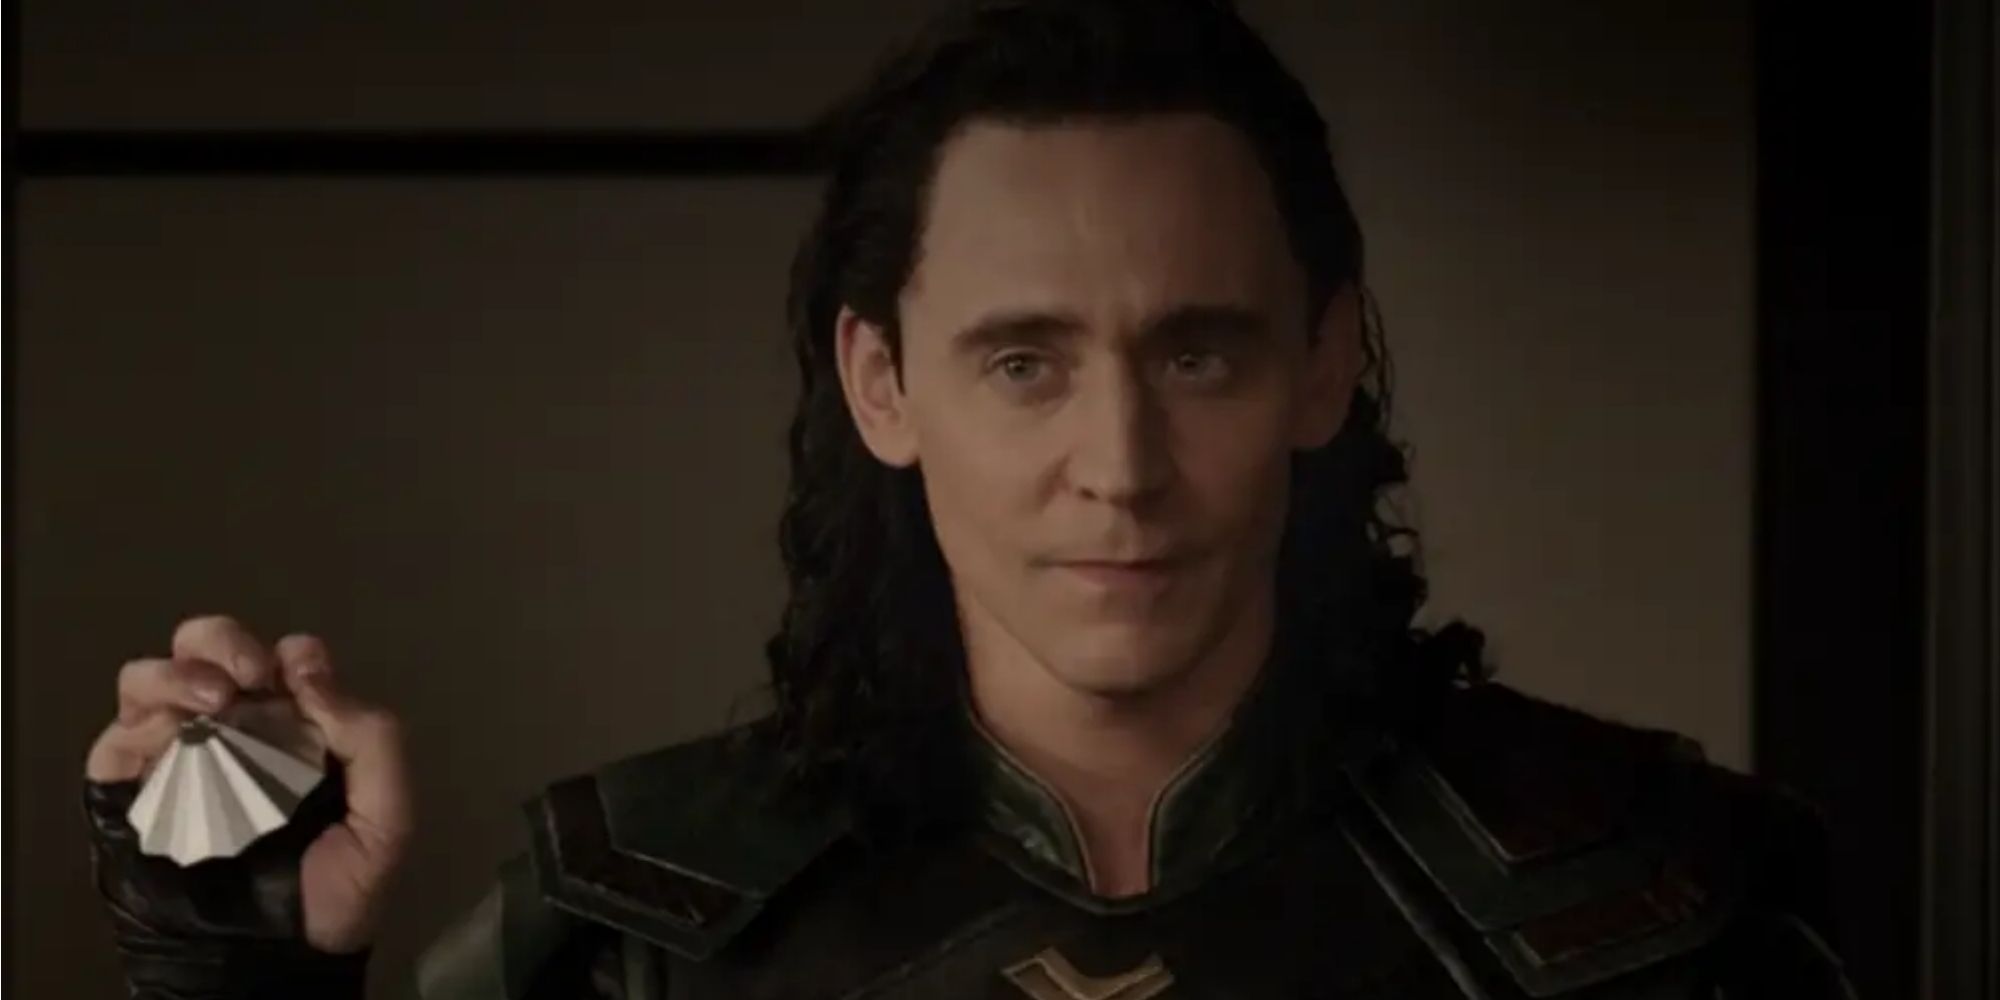 Loki reconciles with Thor at the end of Thor: Ragnarok.